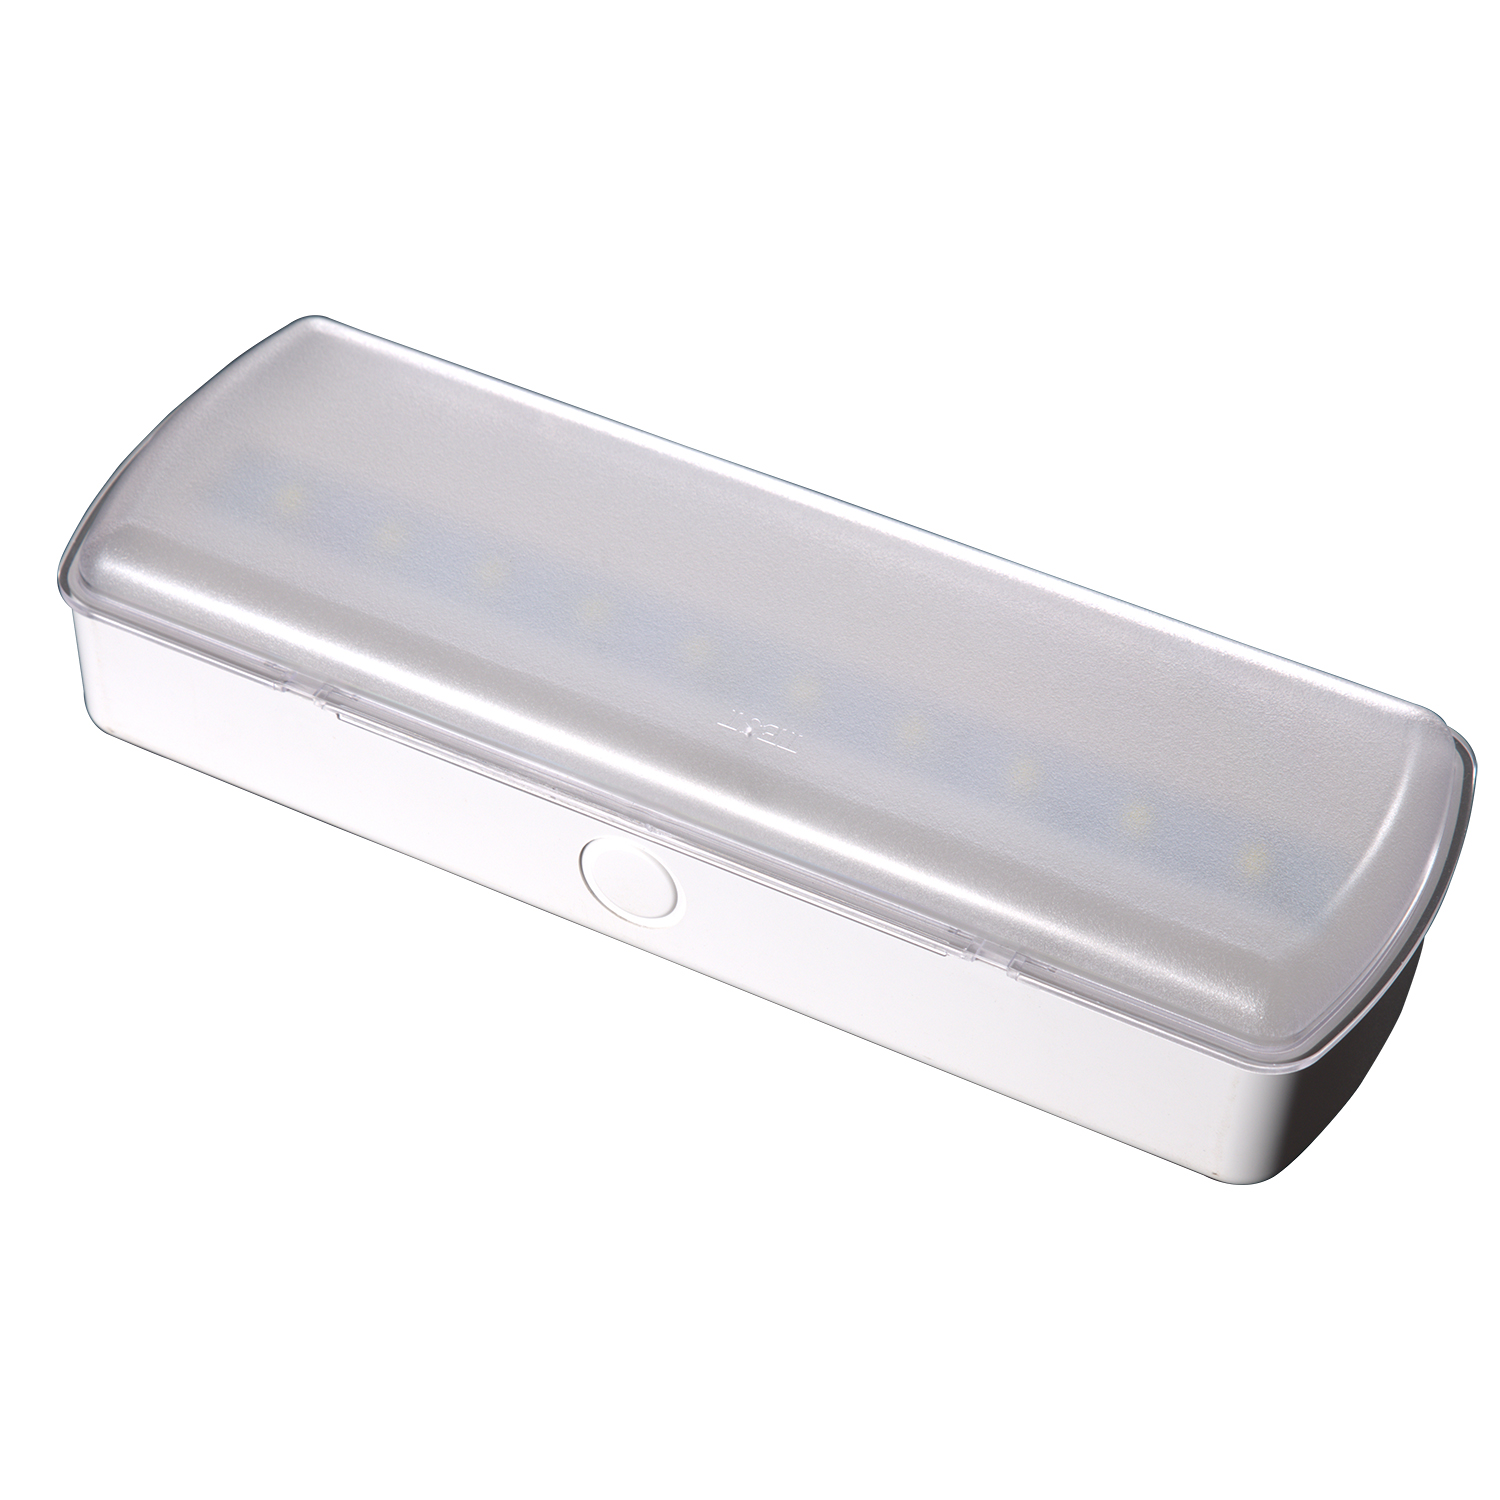 5W SMD LED Emergency Light With Test Button